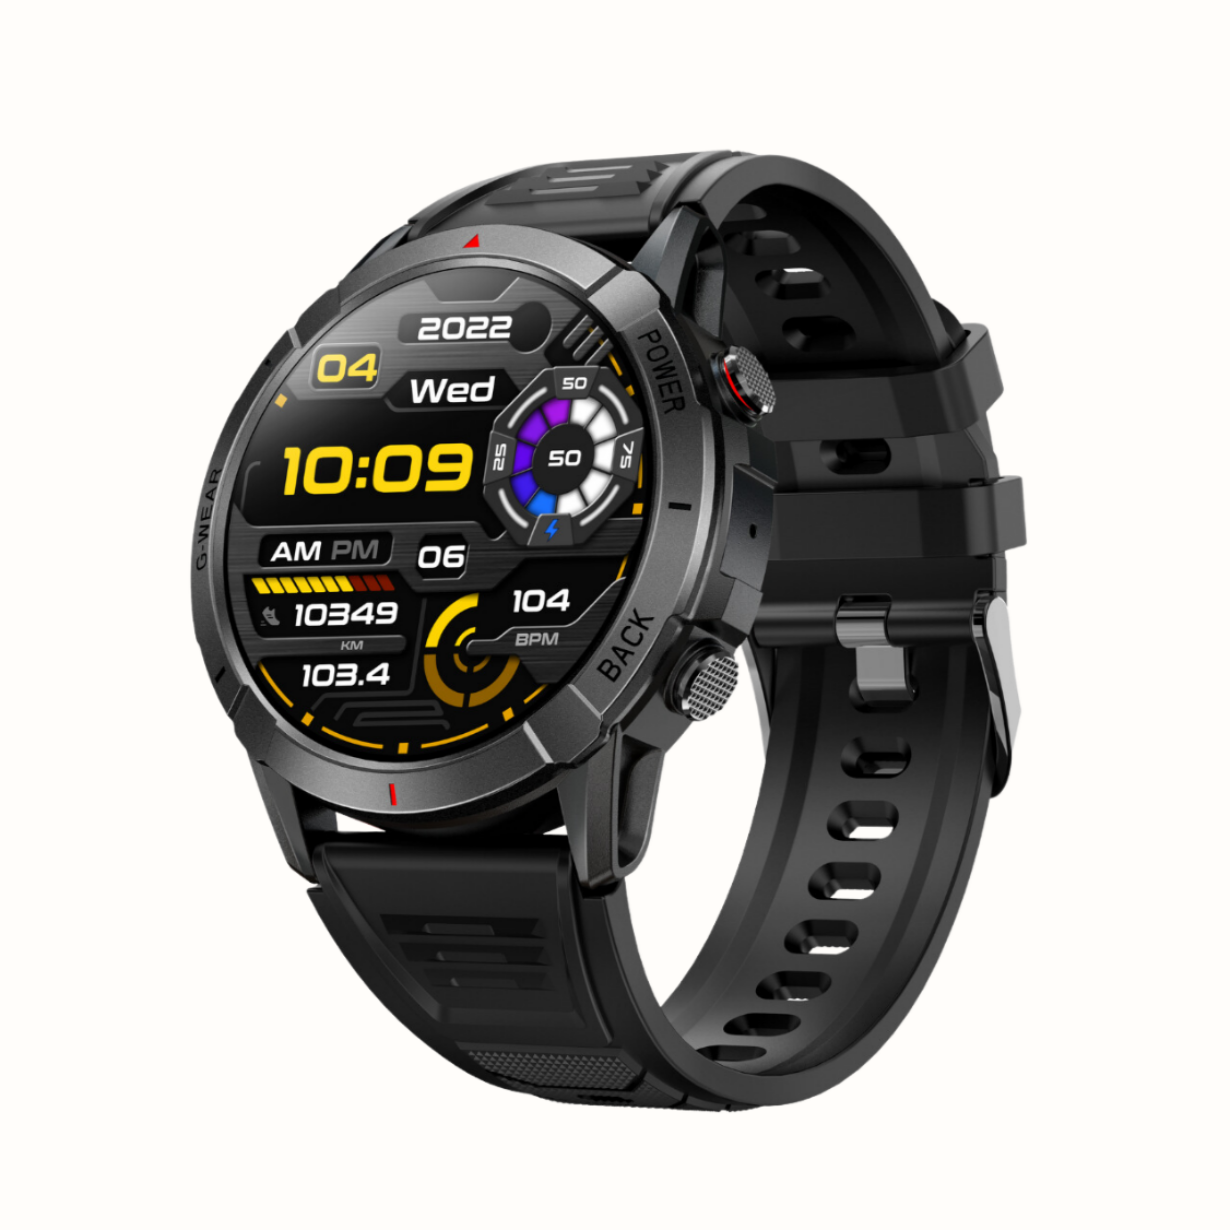 NX10 Sport Smartwatch, AMOLED Display, Setup with Android device, Setup with Apple Device, Water resistance - IP68, Best Smart Watch, 2023, Track Activity,Track WOmens Health, Pedometer, Calorie Monitor, Sleep Tracking, Heart Rate Monitor, Blood Oxygen Monitor- Spo2, Multisport Mode, Color - Black